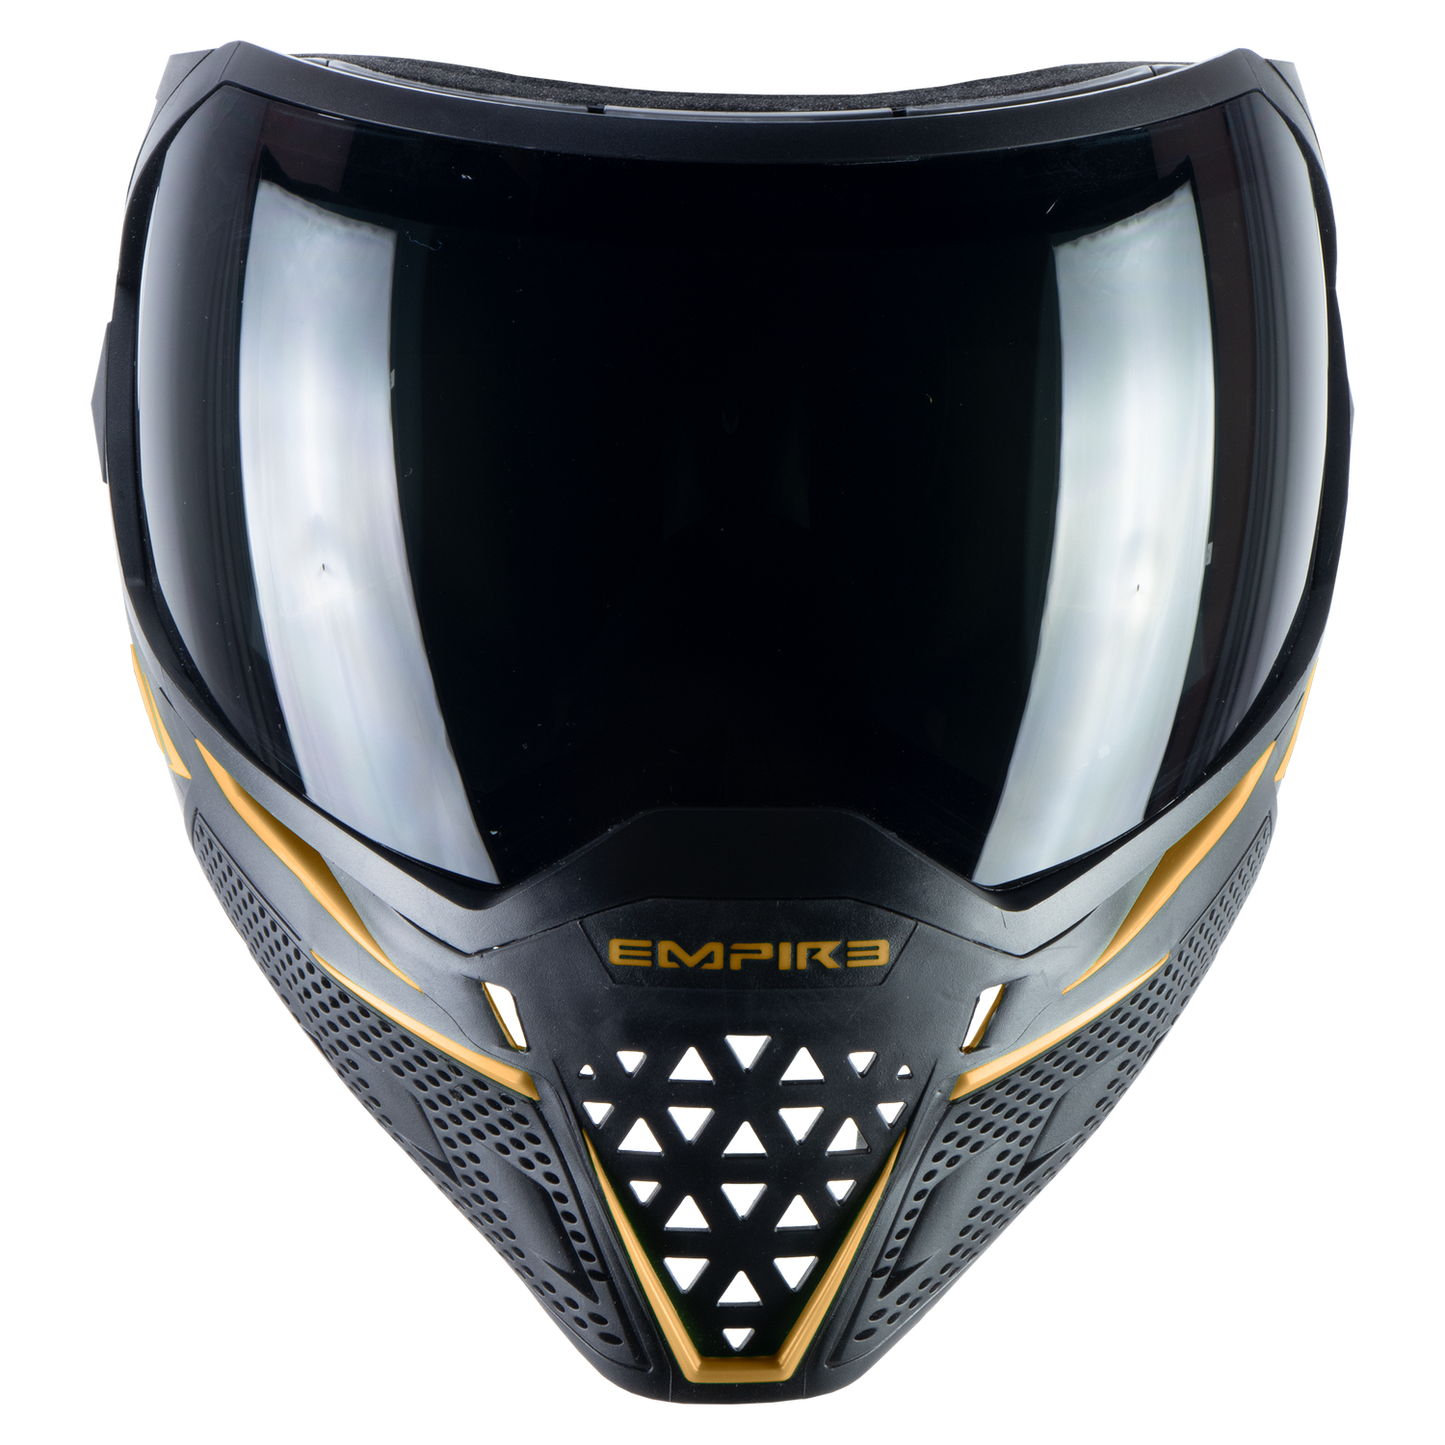 Empire EVS Goggle - Black/Gold - with 2 lenses [Thermal Ninja & Thermal Clear]